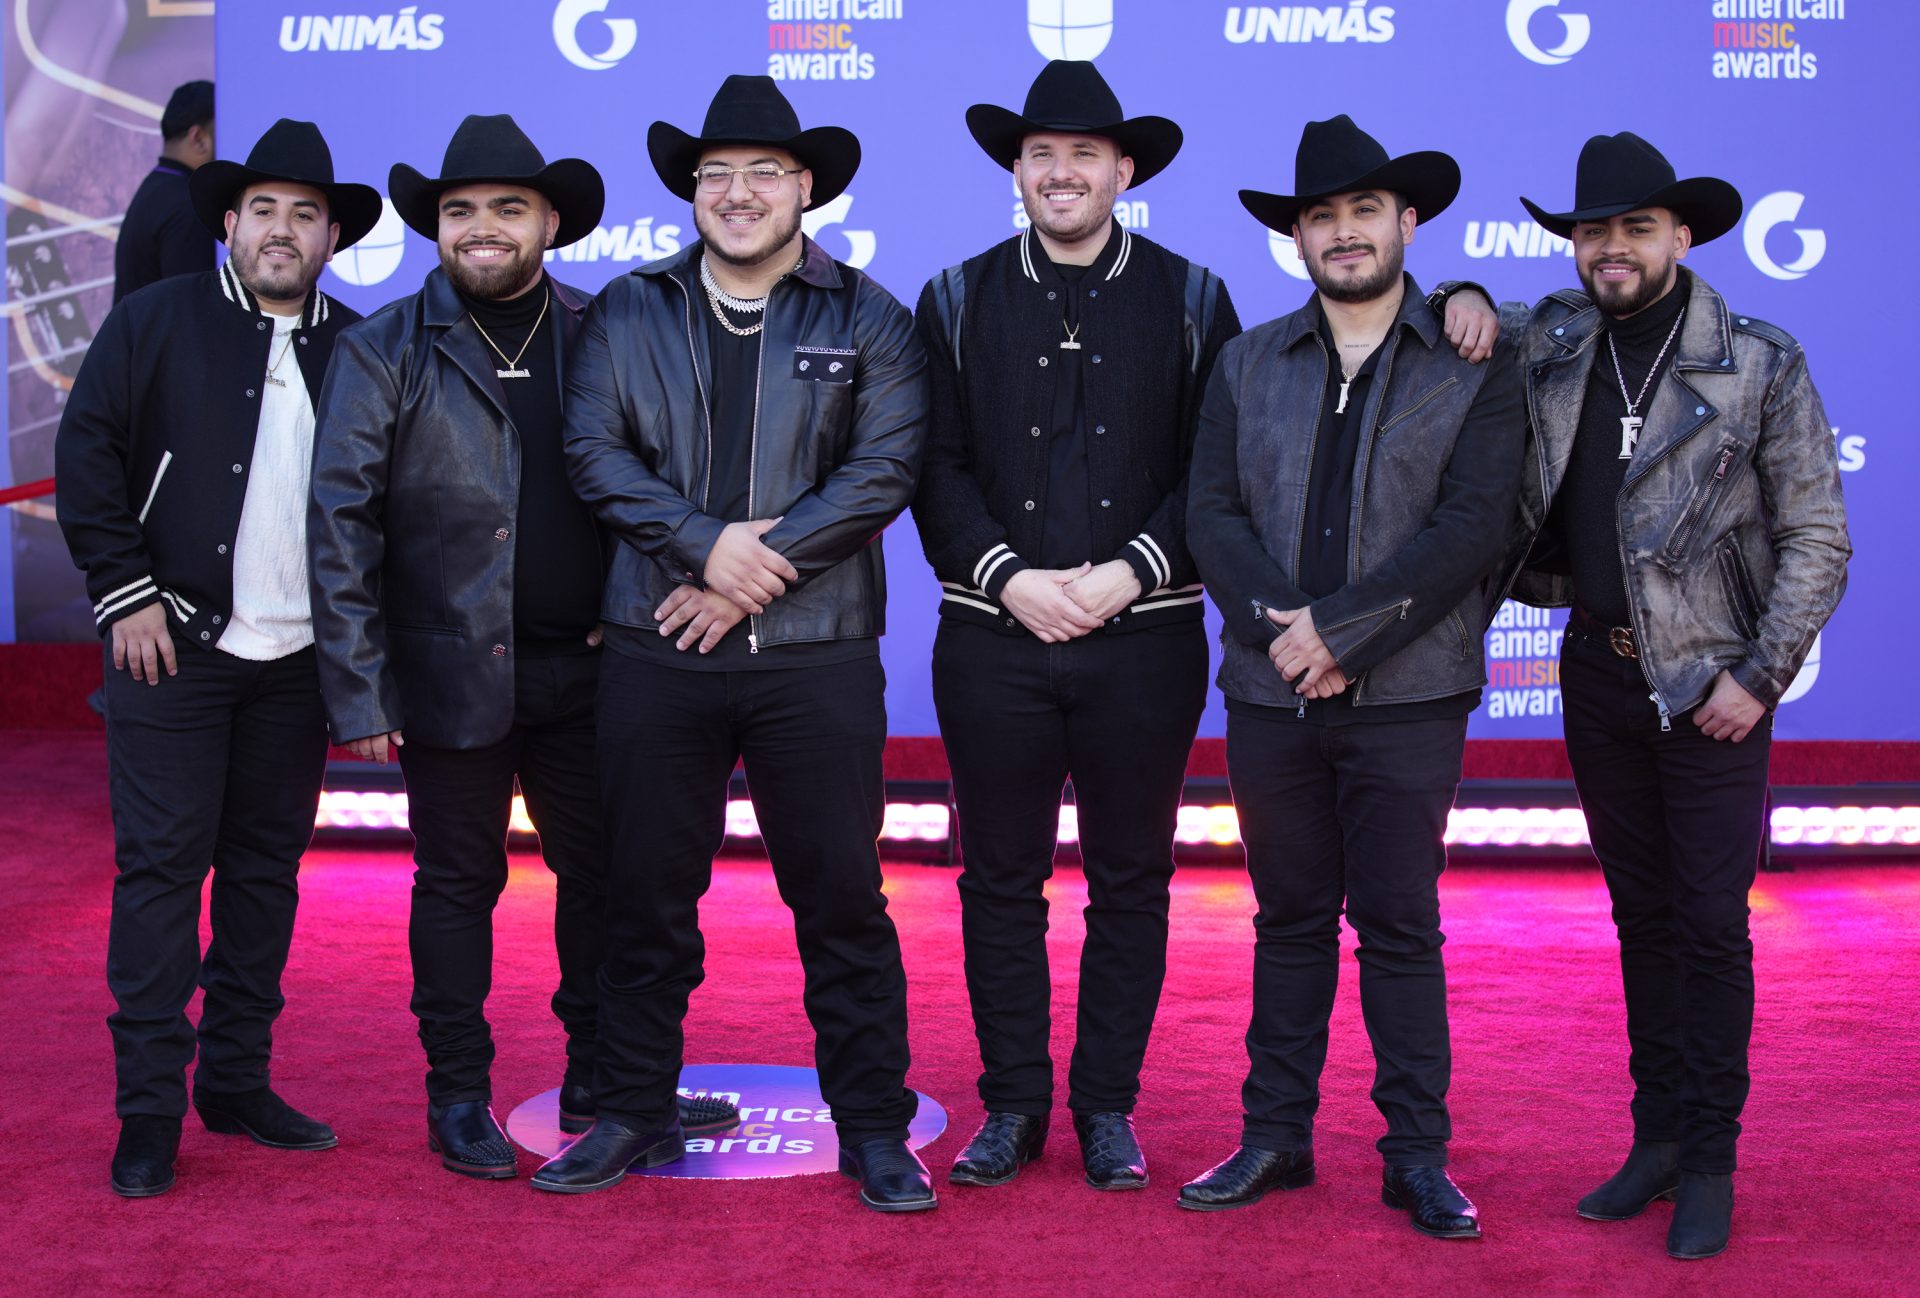 After going global, Grupo Frontera’s genre-melding new album has no limits